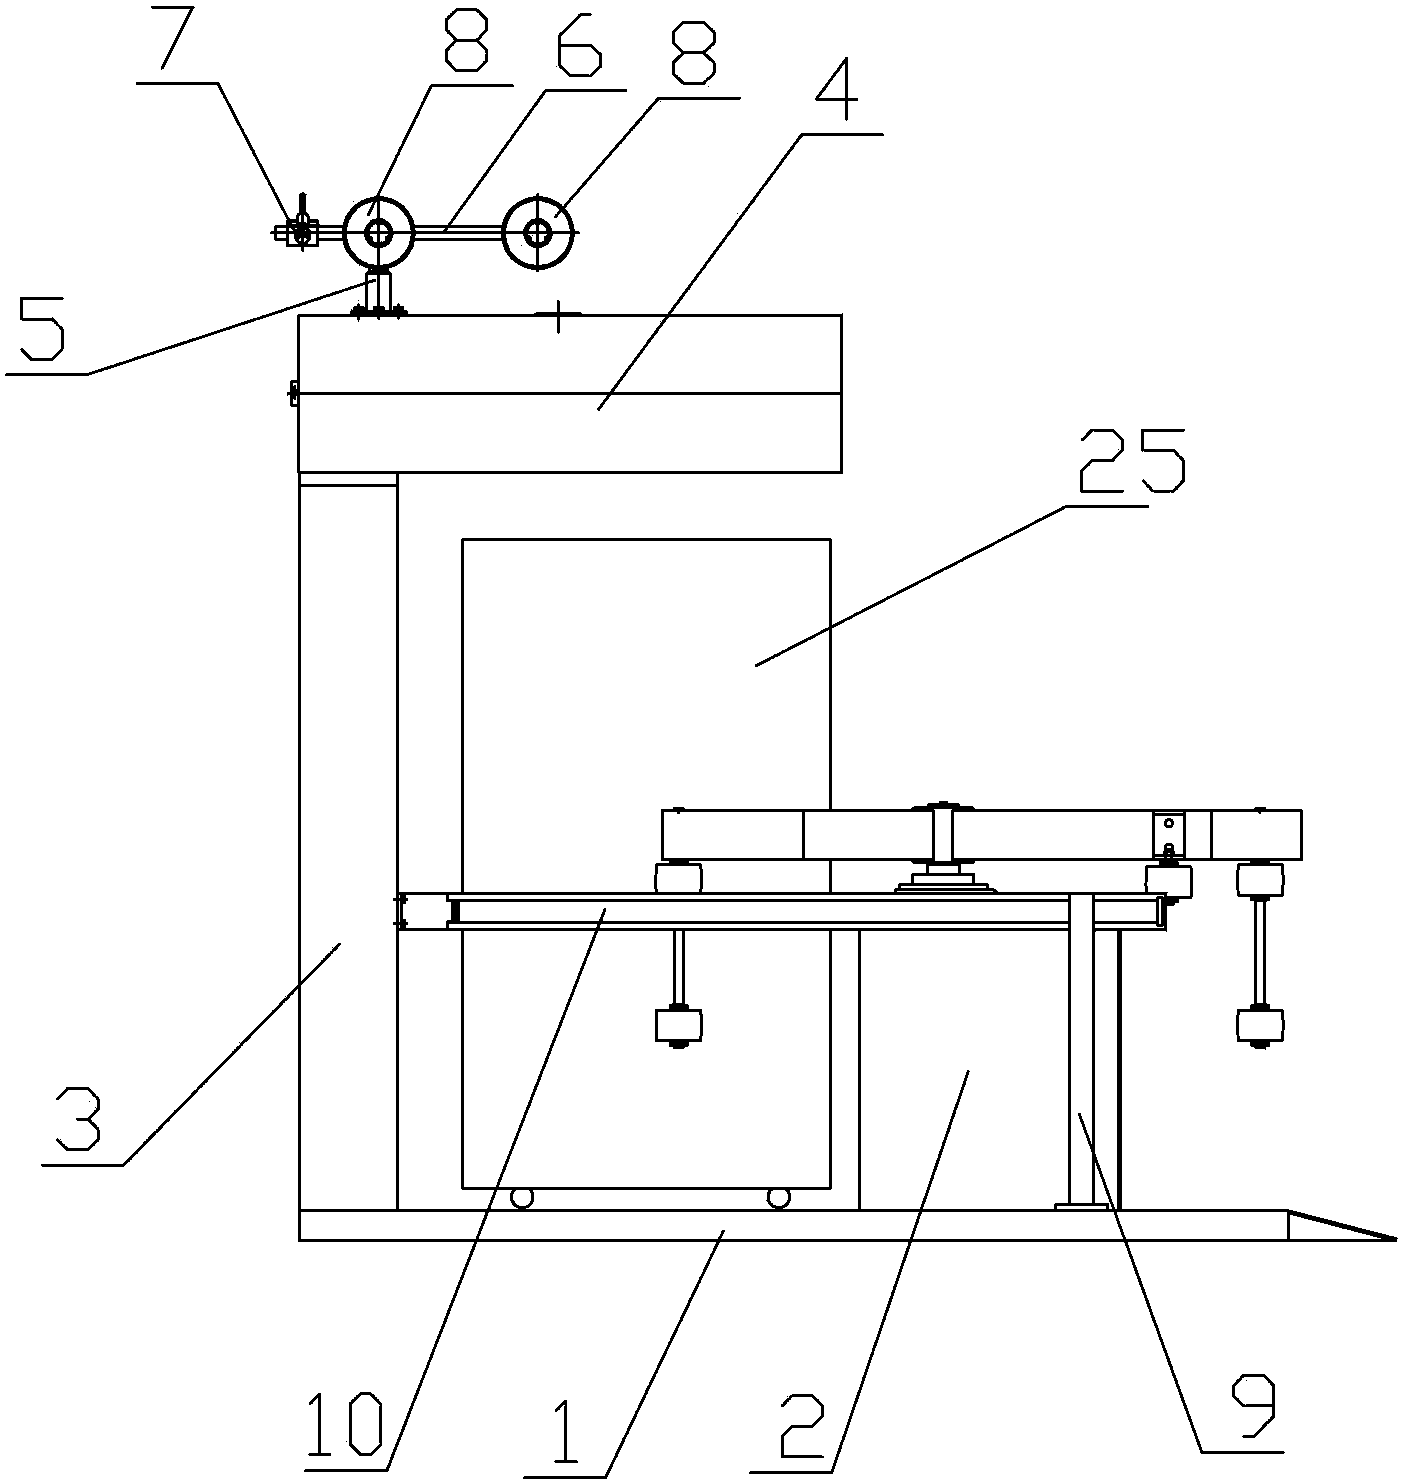 Three-position automatic barrel changing device